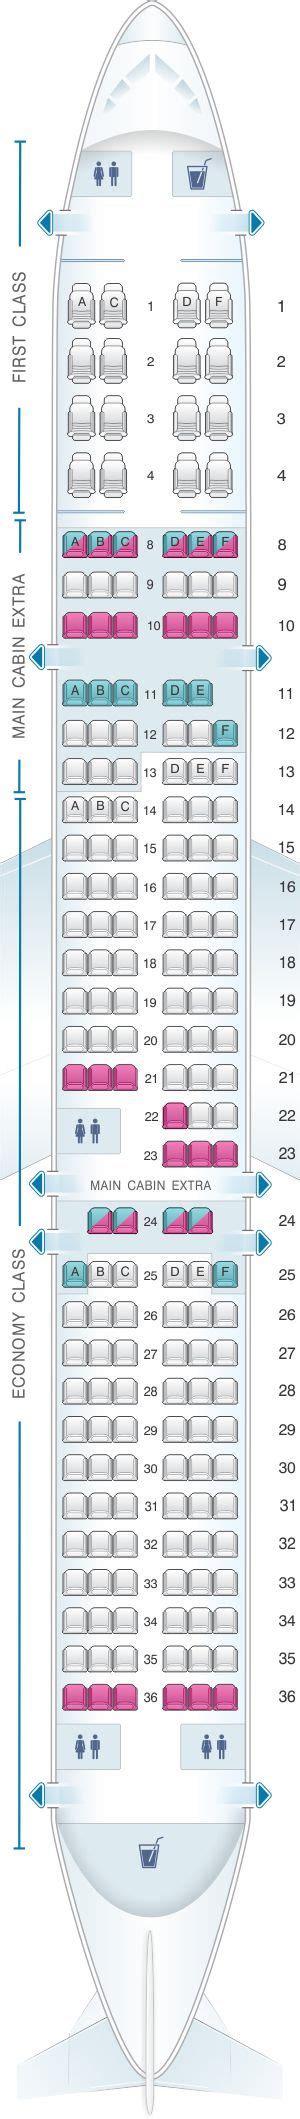 Seat Map American Airlines Airbus A Pax Airline Seats Vietnam